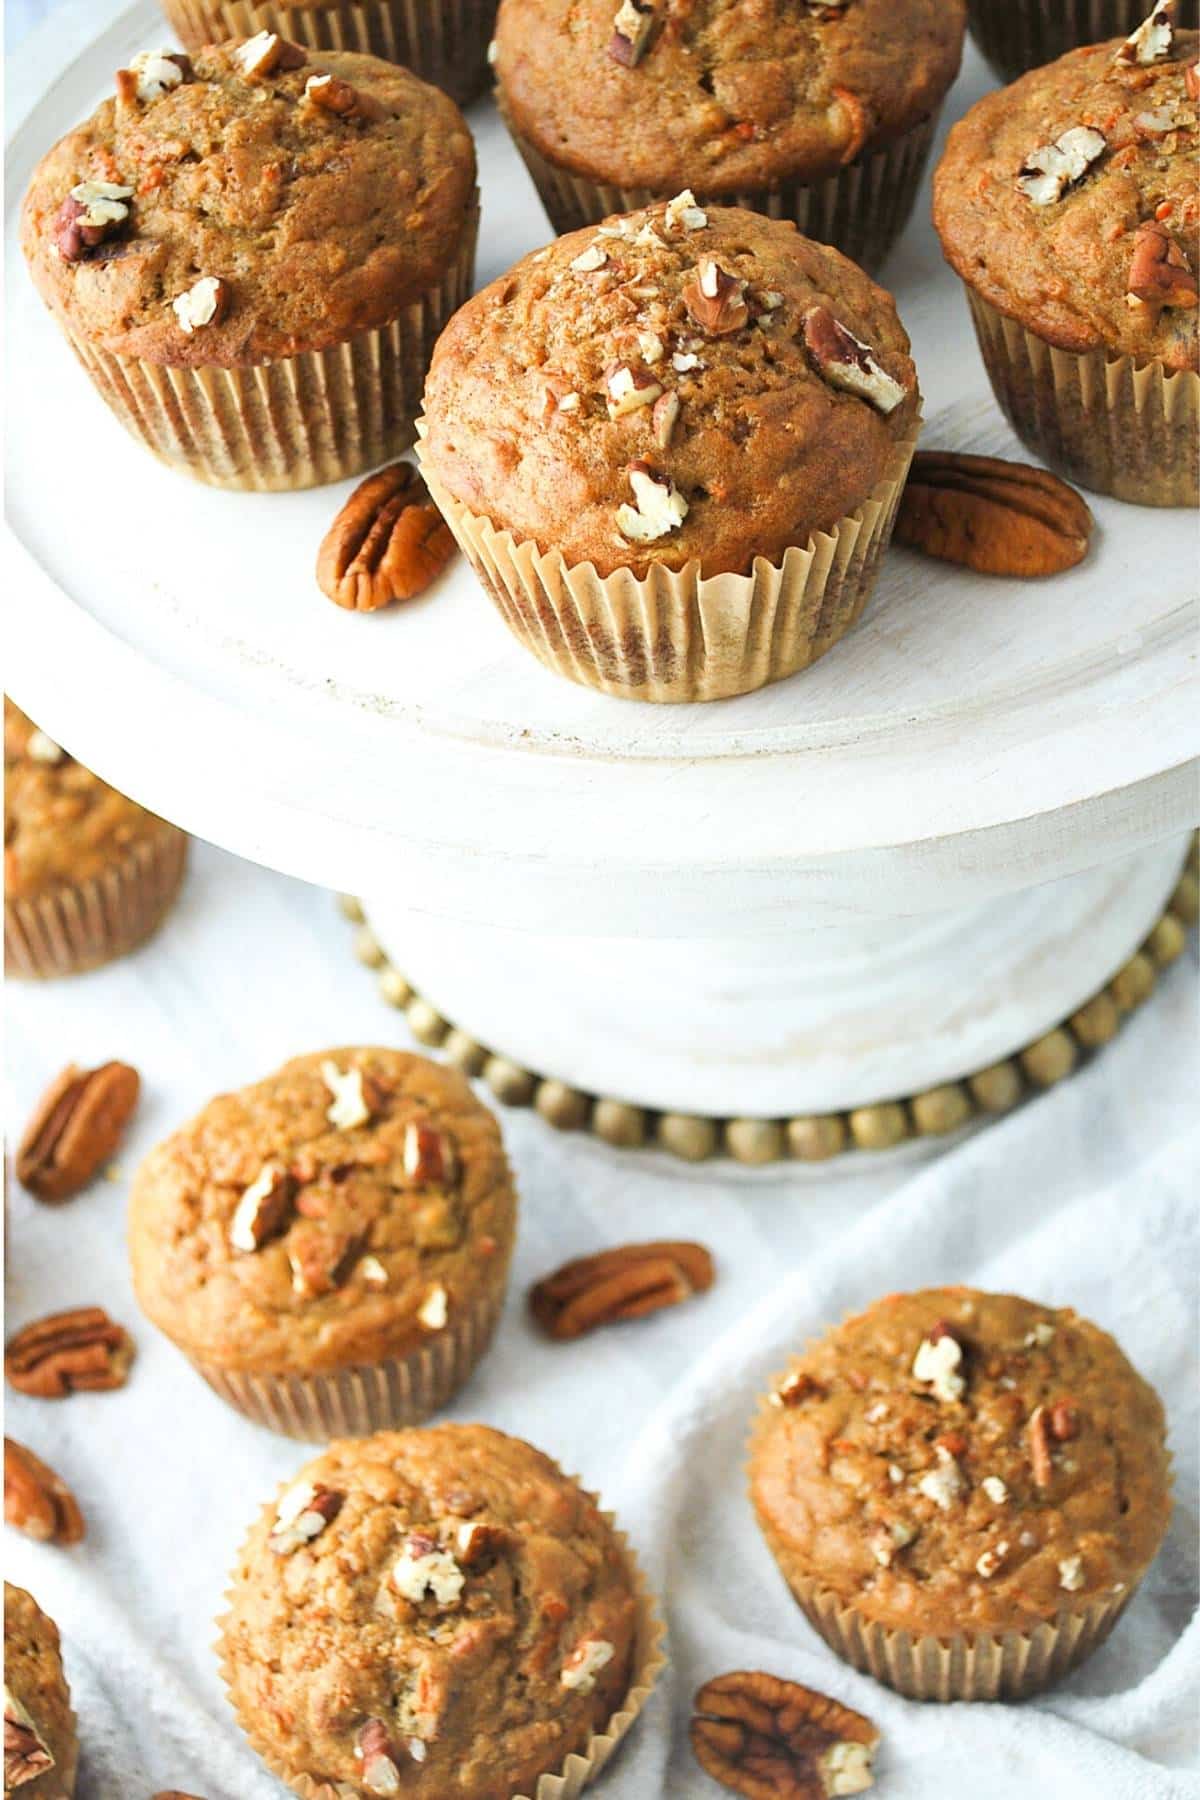 banana carrot muffins on a white platter with muffins on the table below